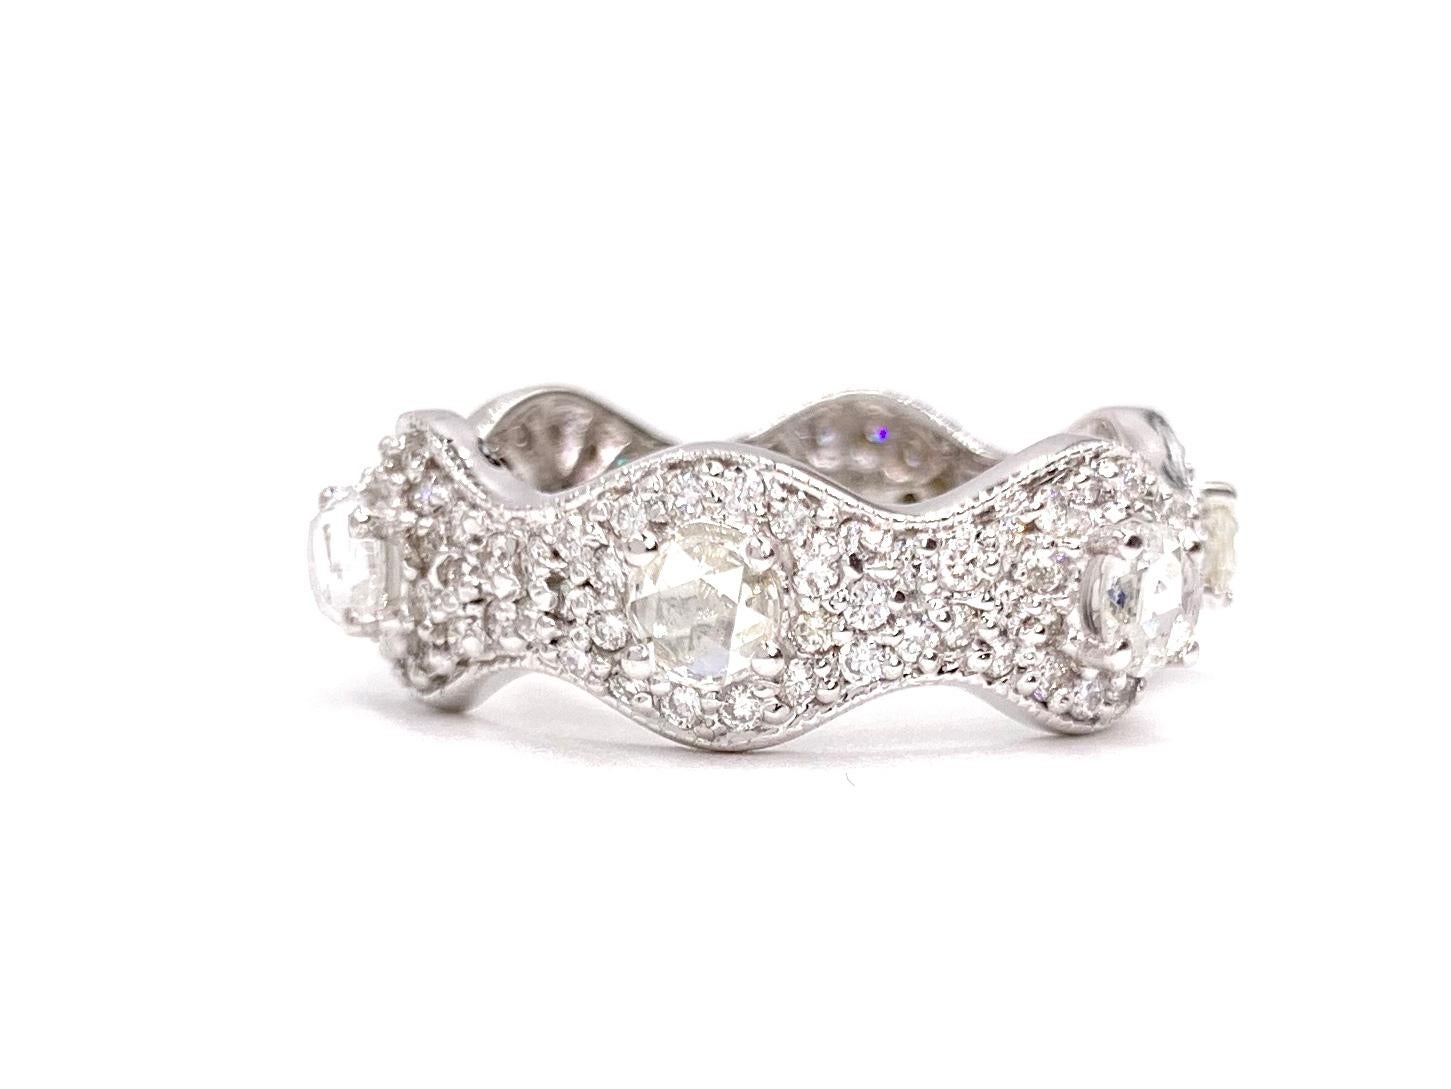 Designed by Barry Kronen. An 18 karat white gold curved eternity diamond ring featuring approximately .75 carats of round rose cut diamonds surrounded by approximately .65 carats of pave set round brilliant diamonds (1.40 diamond carat total